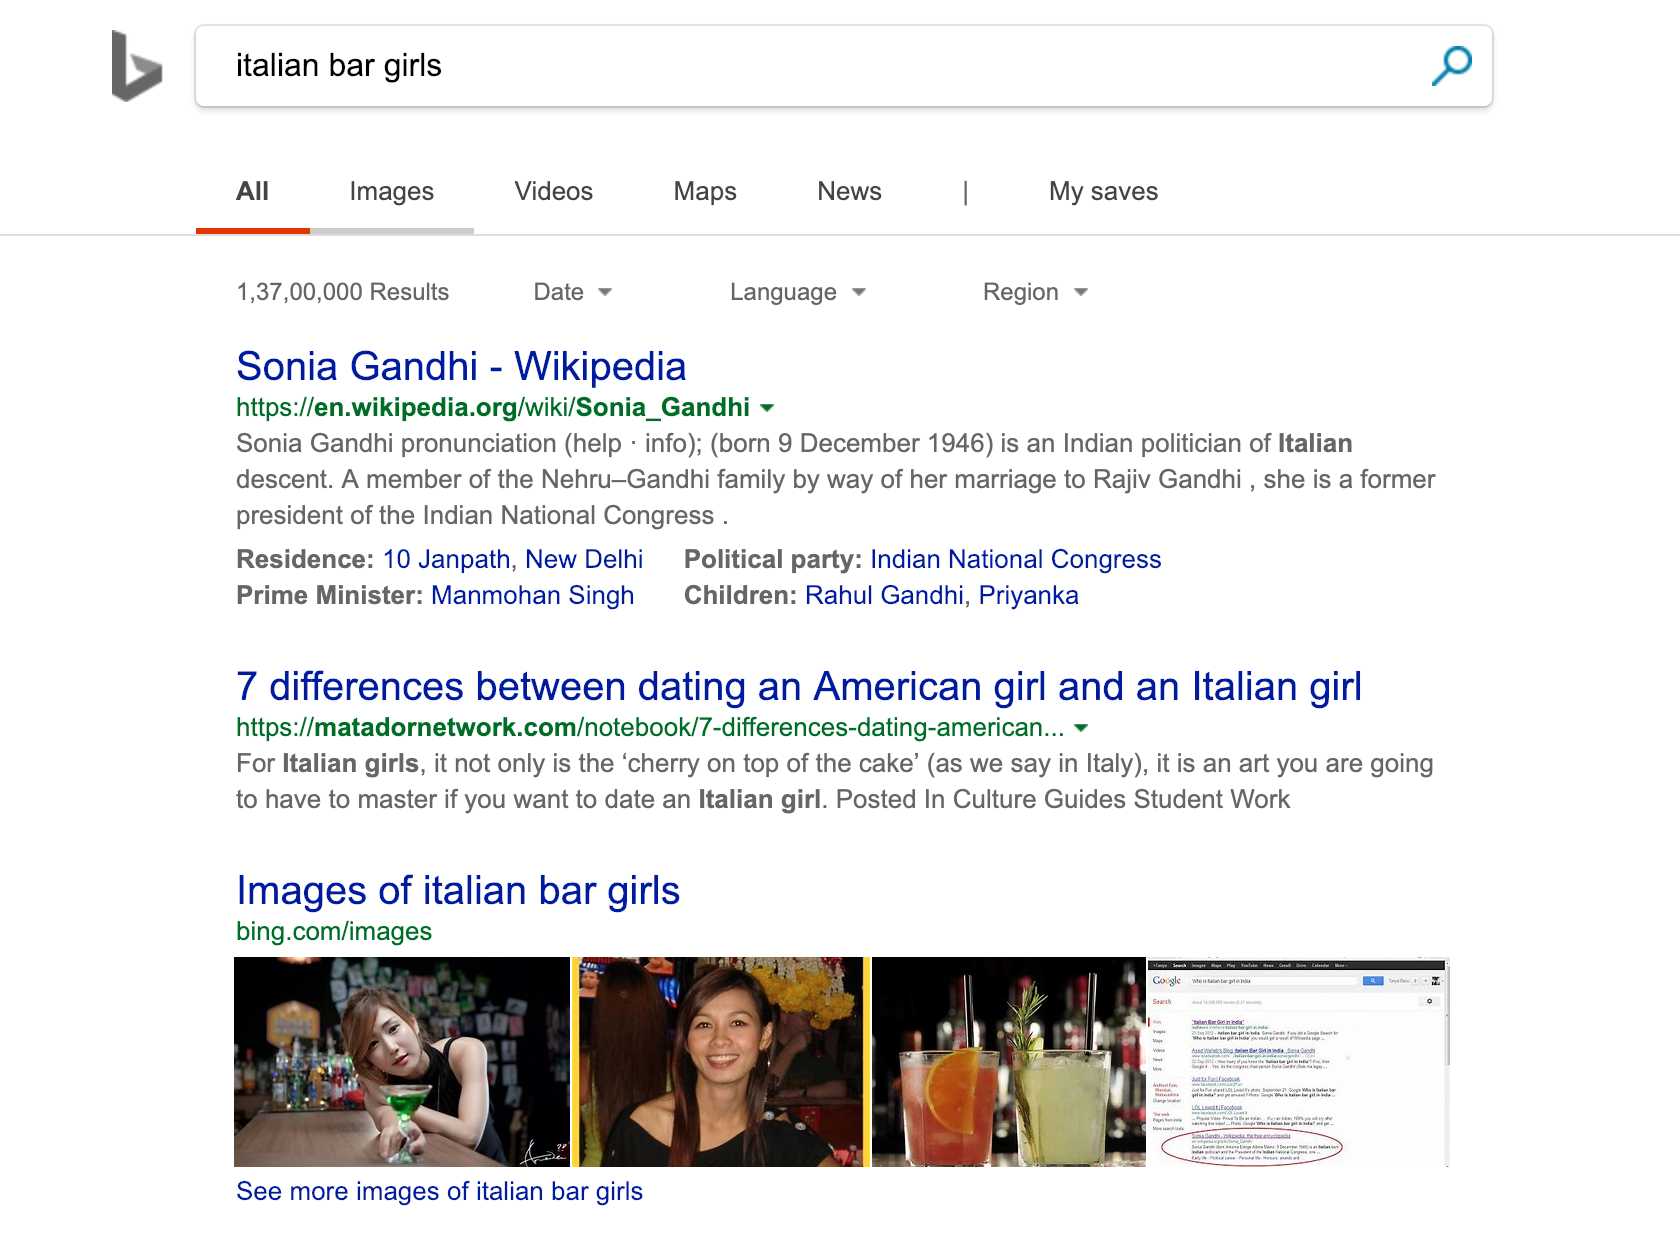 Even Microsoft's Bing throws up Sonia Gandhi's Wikipedia page if you search for 'Italian Bar Girls'